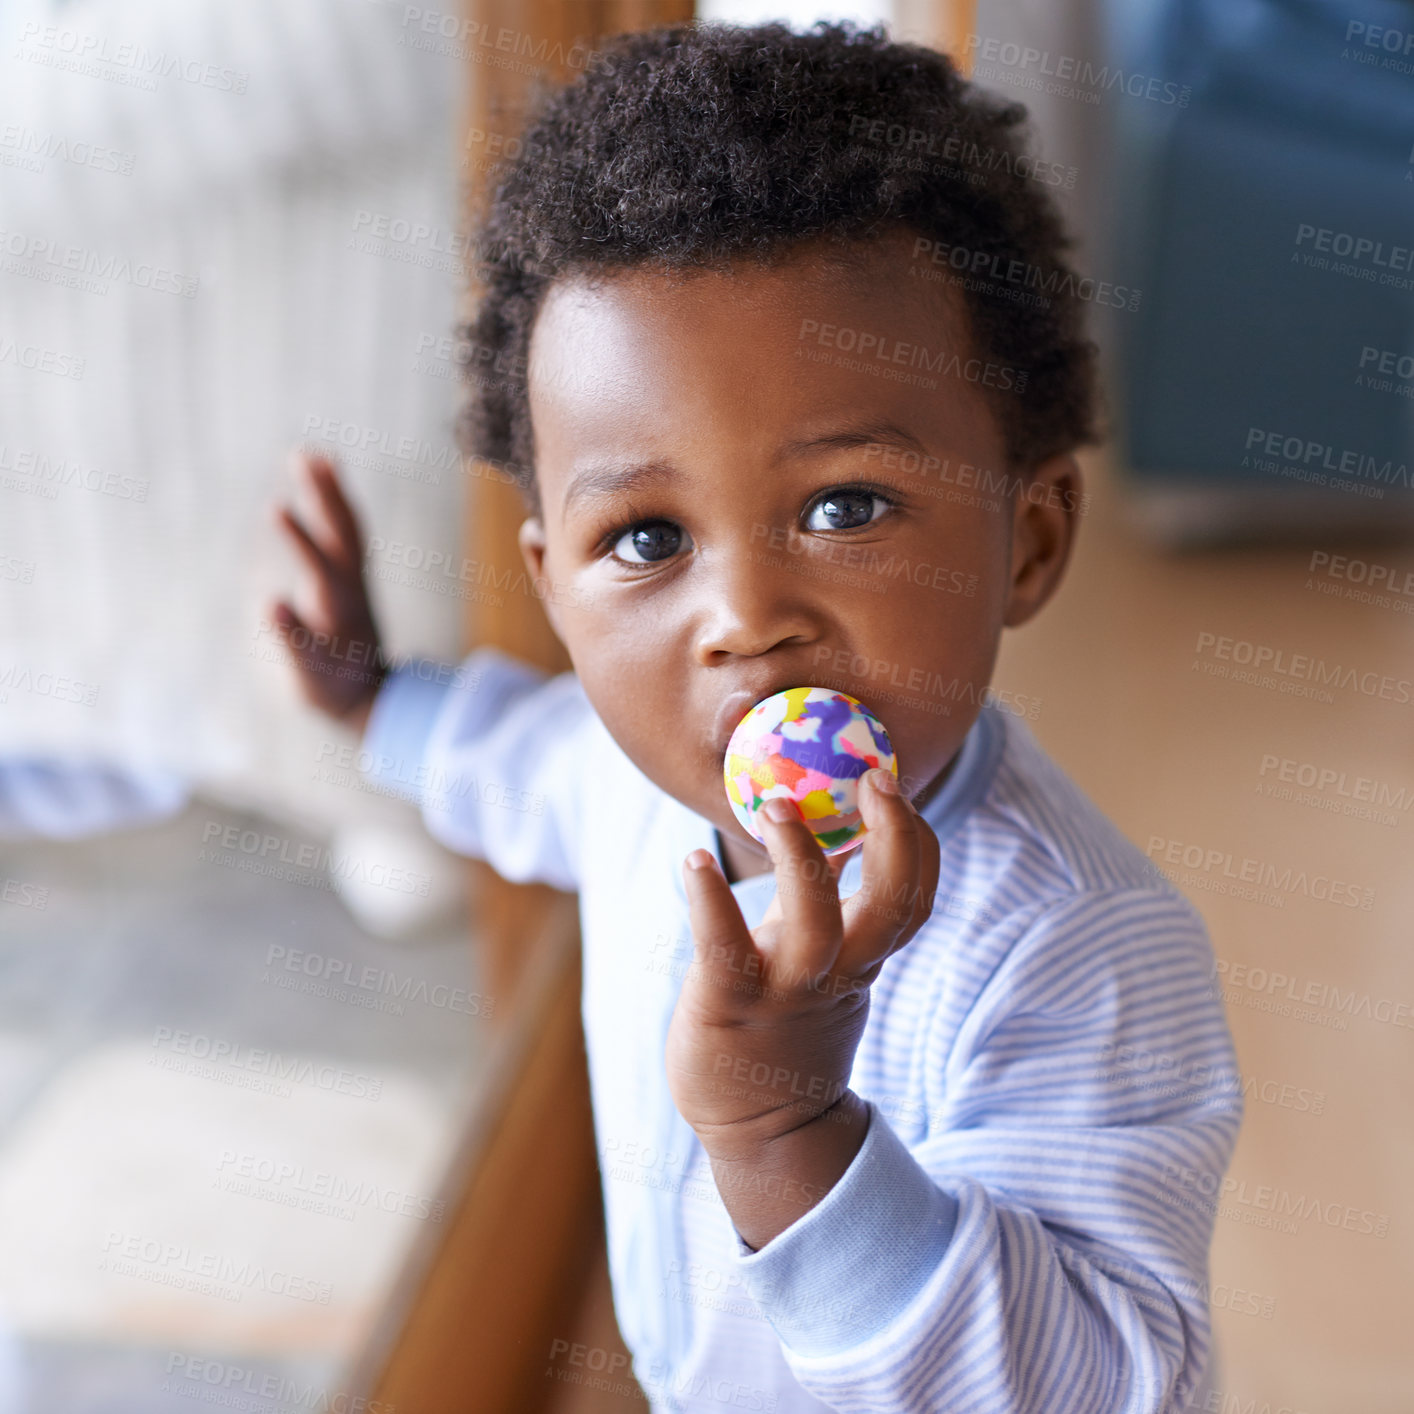 Buy stock photo Portrait, baby or toy in play, coordination or growth as learning, game or progress in Jamaica. Black boy, child or ball in mouth as healthy, motor skill or fun in curious, cognitive or sensory